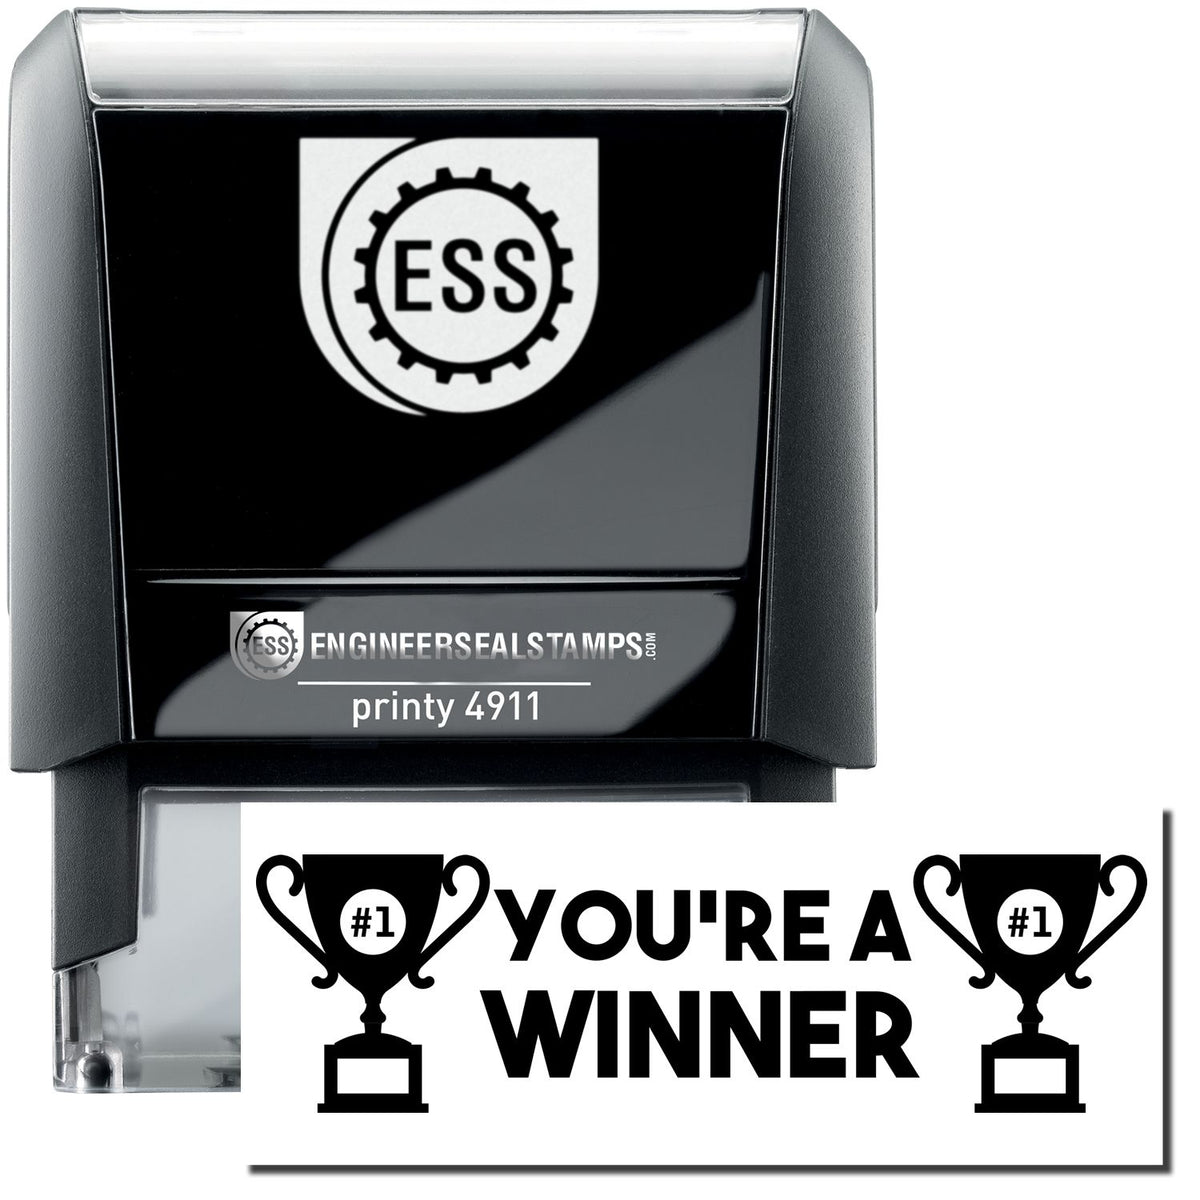 A self-inking stamp with a stamped image showing how the text &quot;YOU&#39;RE A WINNER&quot; (in bold font with images of a trophy with #1 inside on each side) is displayed after stamping.